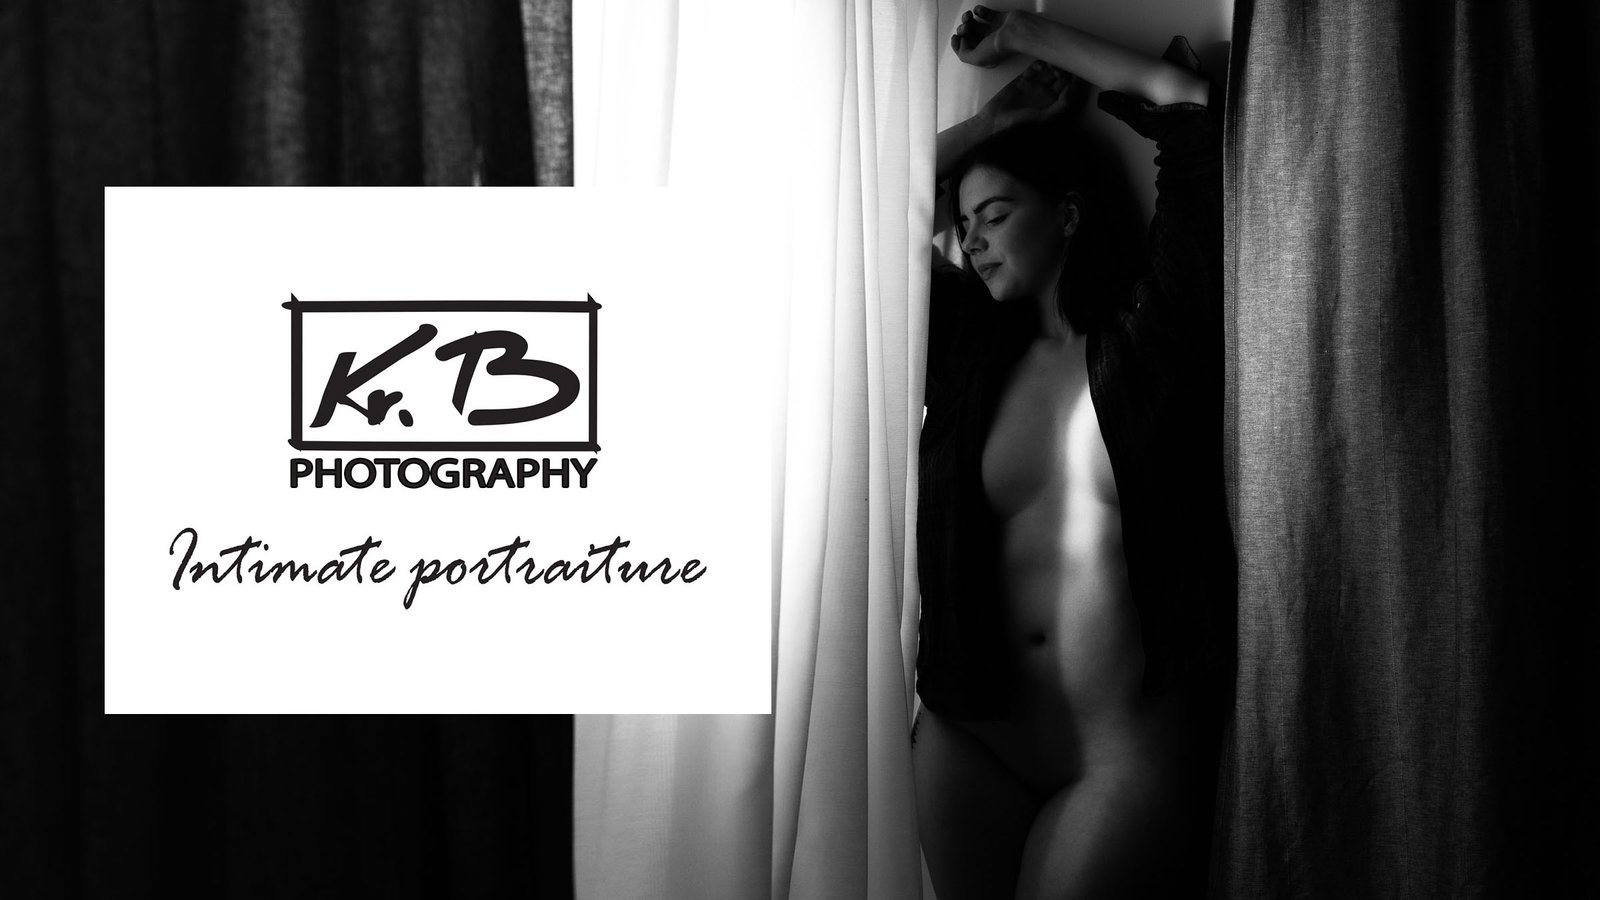 KrB Photography, cover photo 9